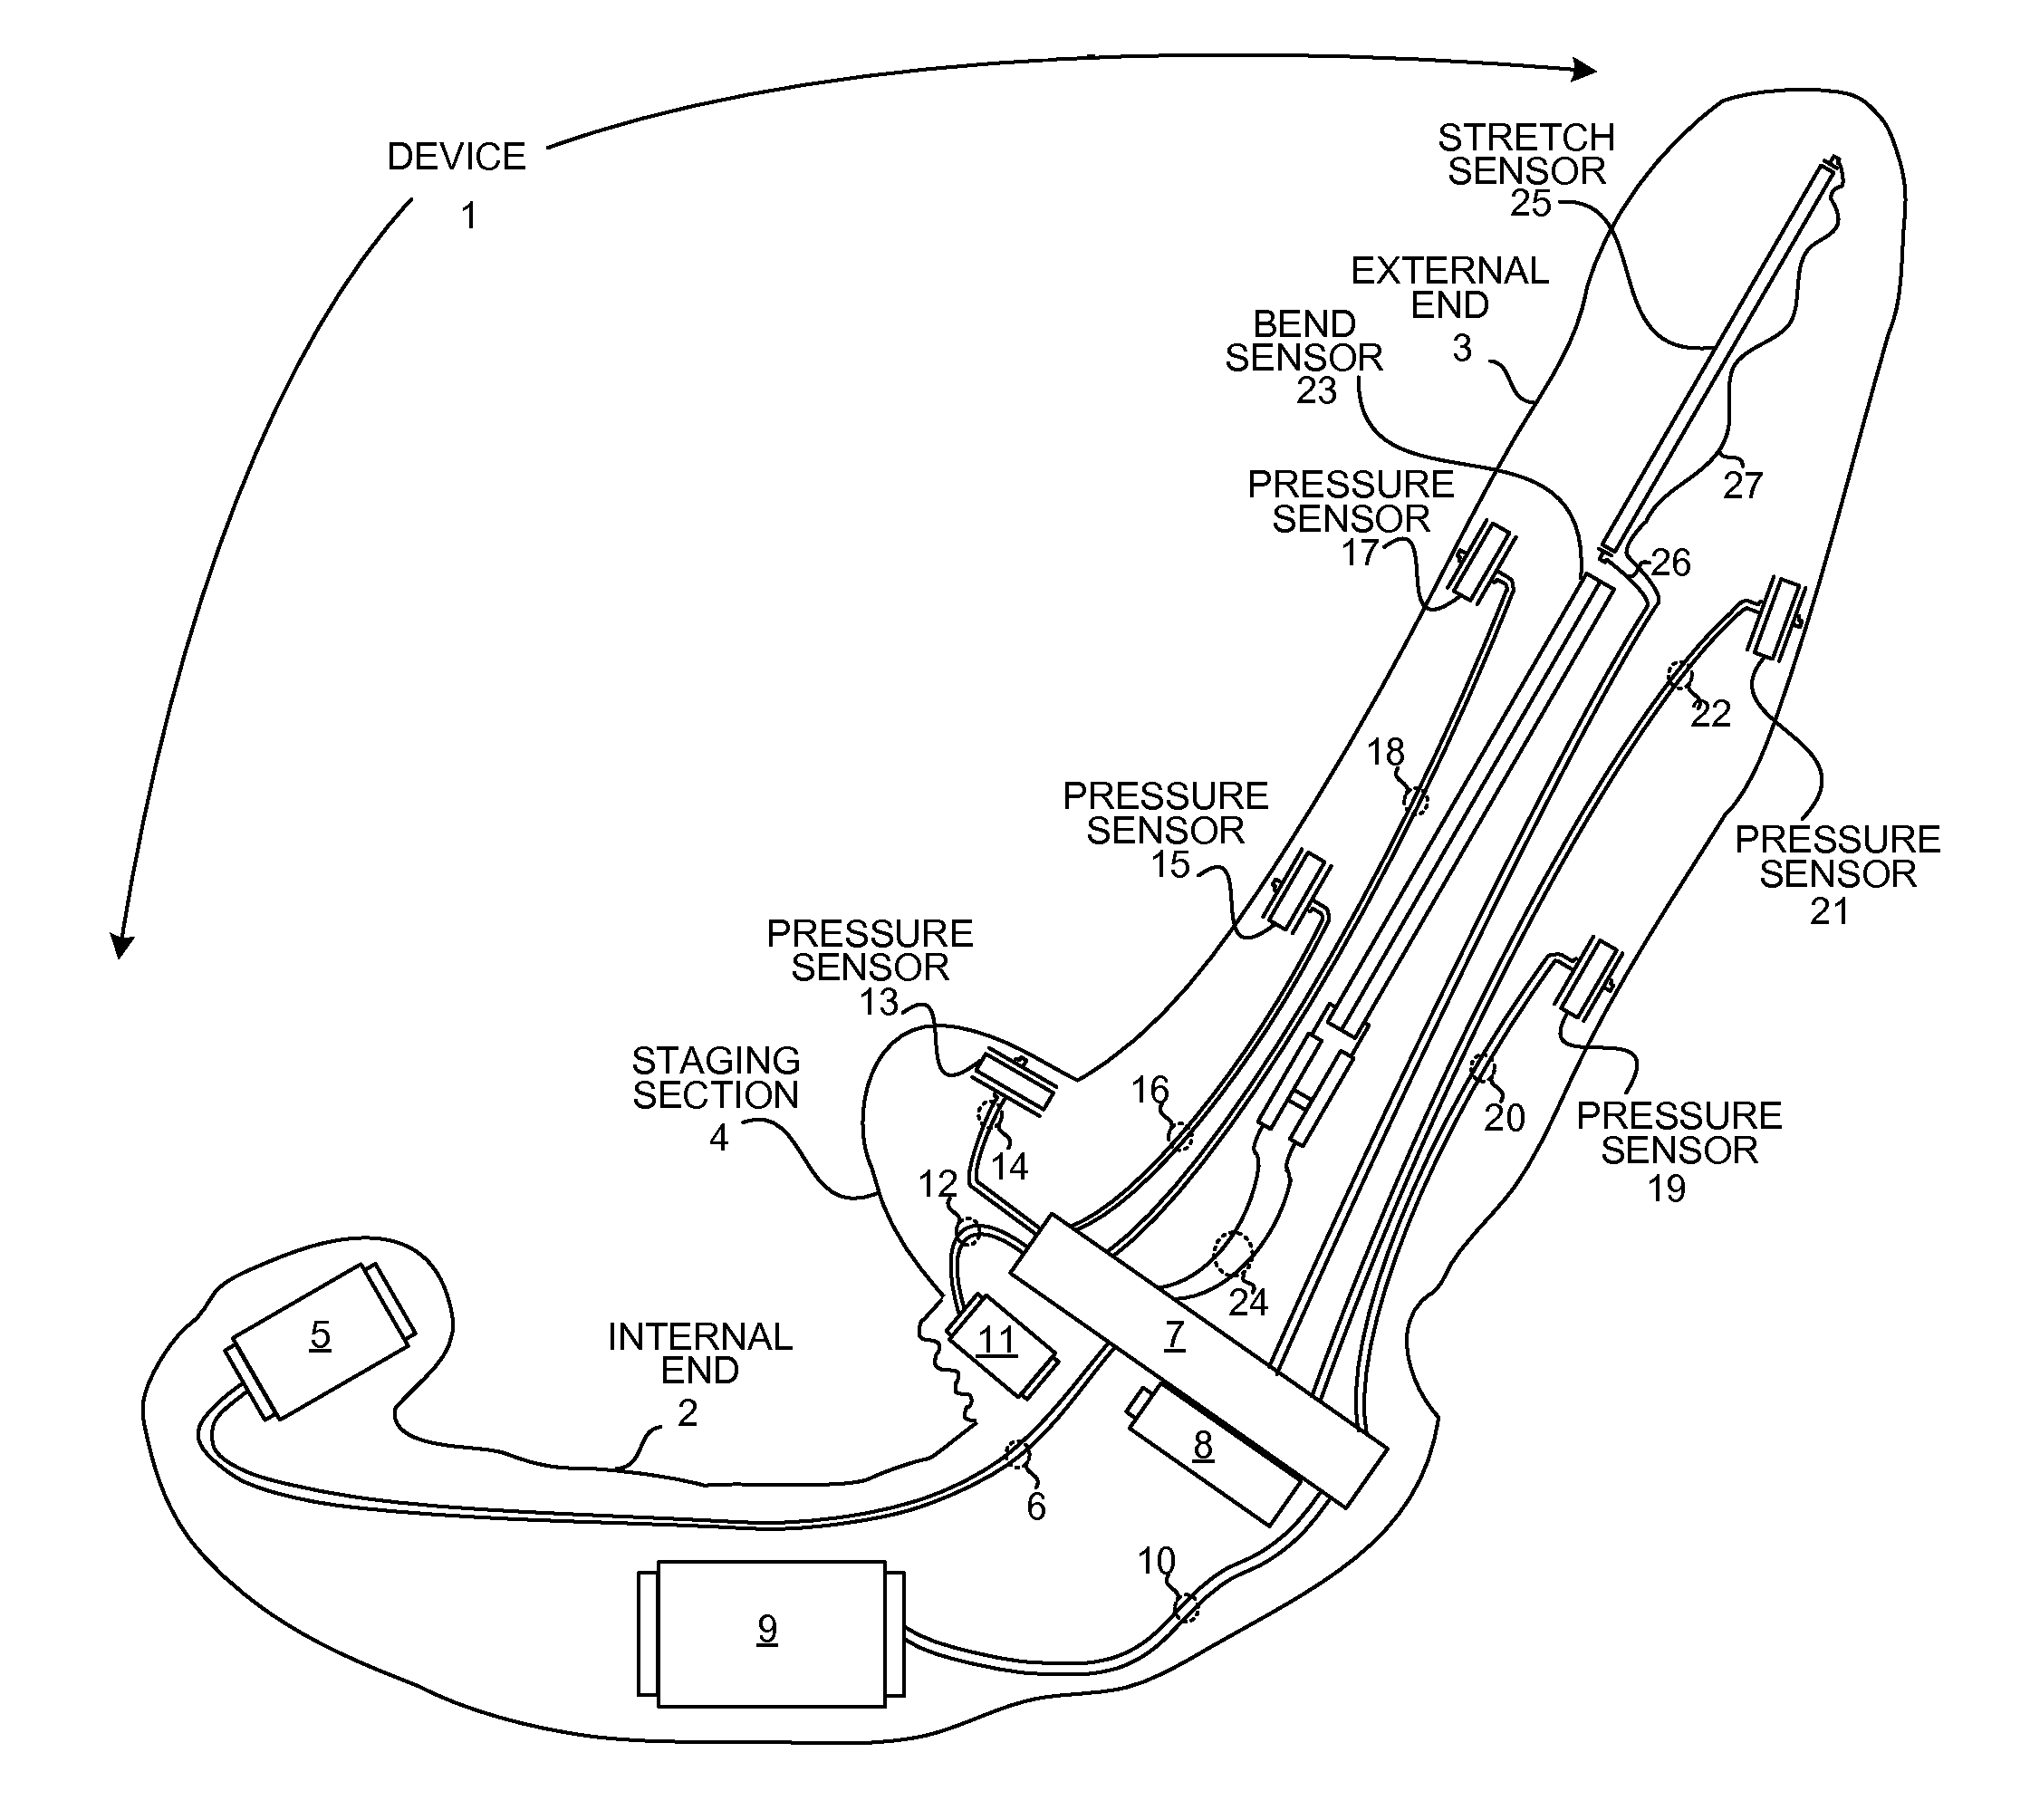 Cybernetic vibrator device with sensors for in-situ gesture controls